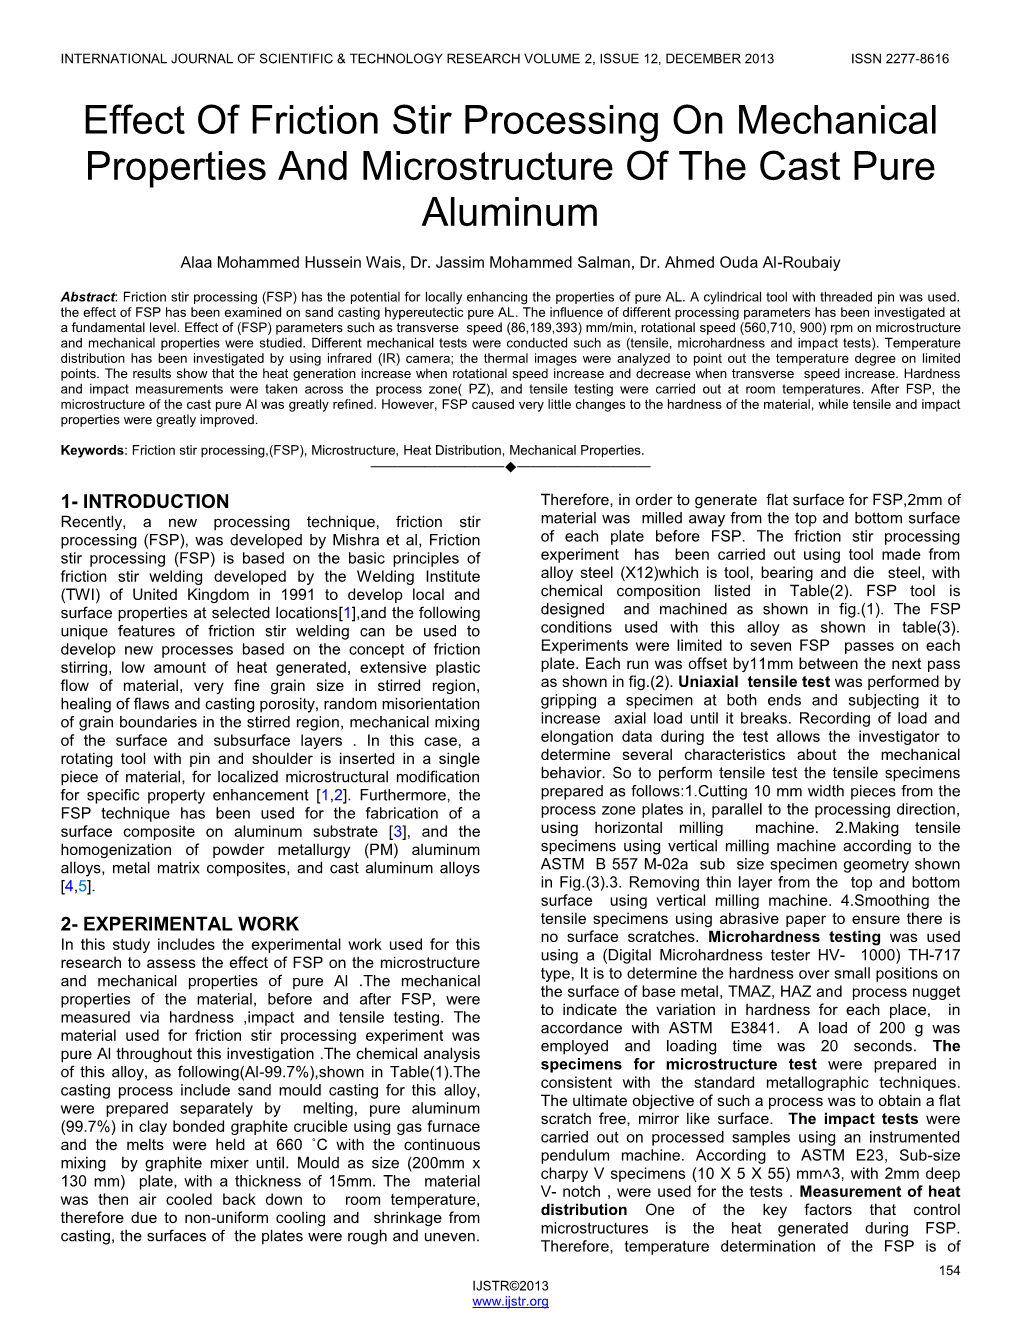 Effect of Friction Stir Processing on Mechanical Properties and Microstructure of the Cast Pure Aluminum